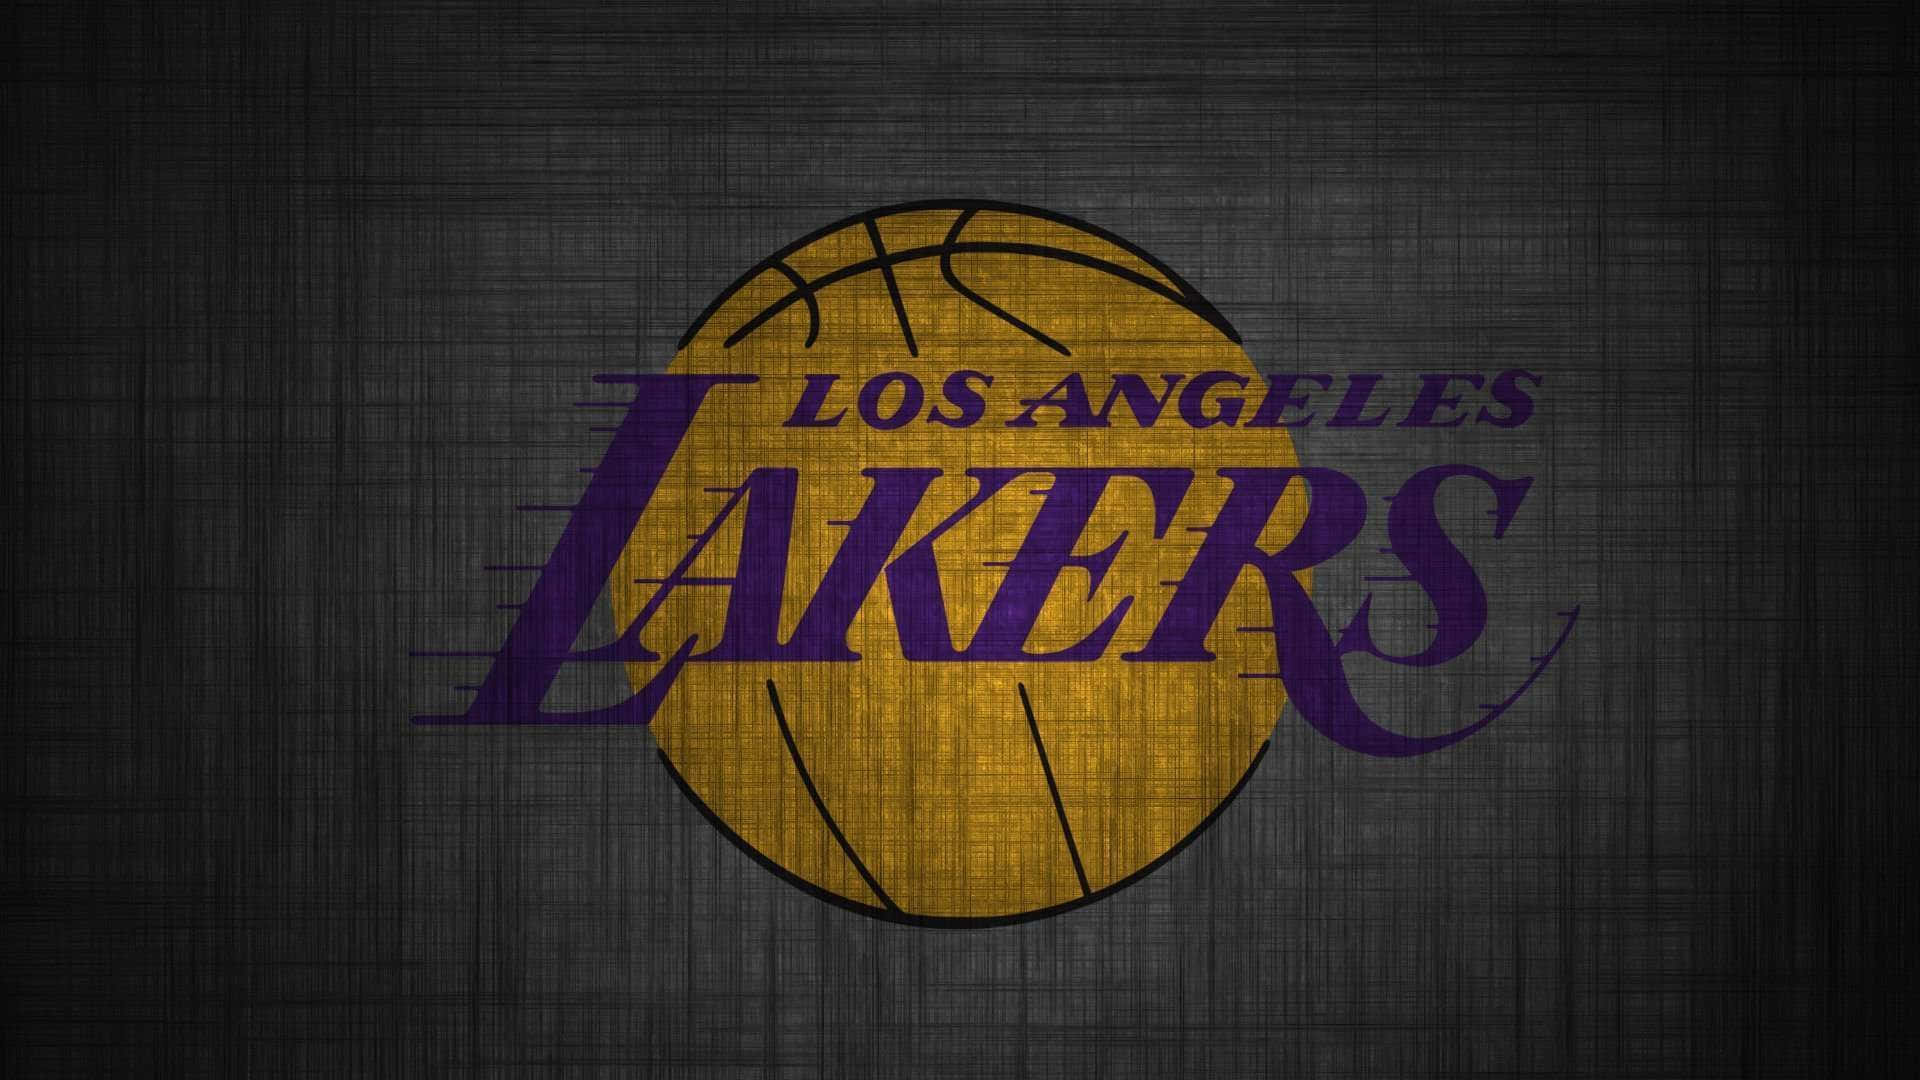 The Lakers Nation: Represents Team Pride